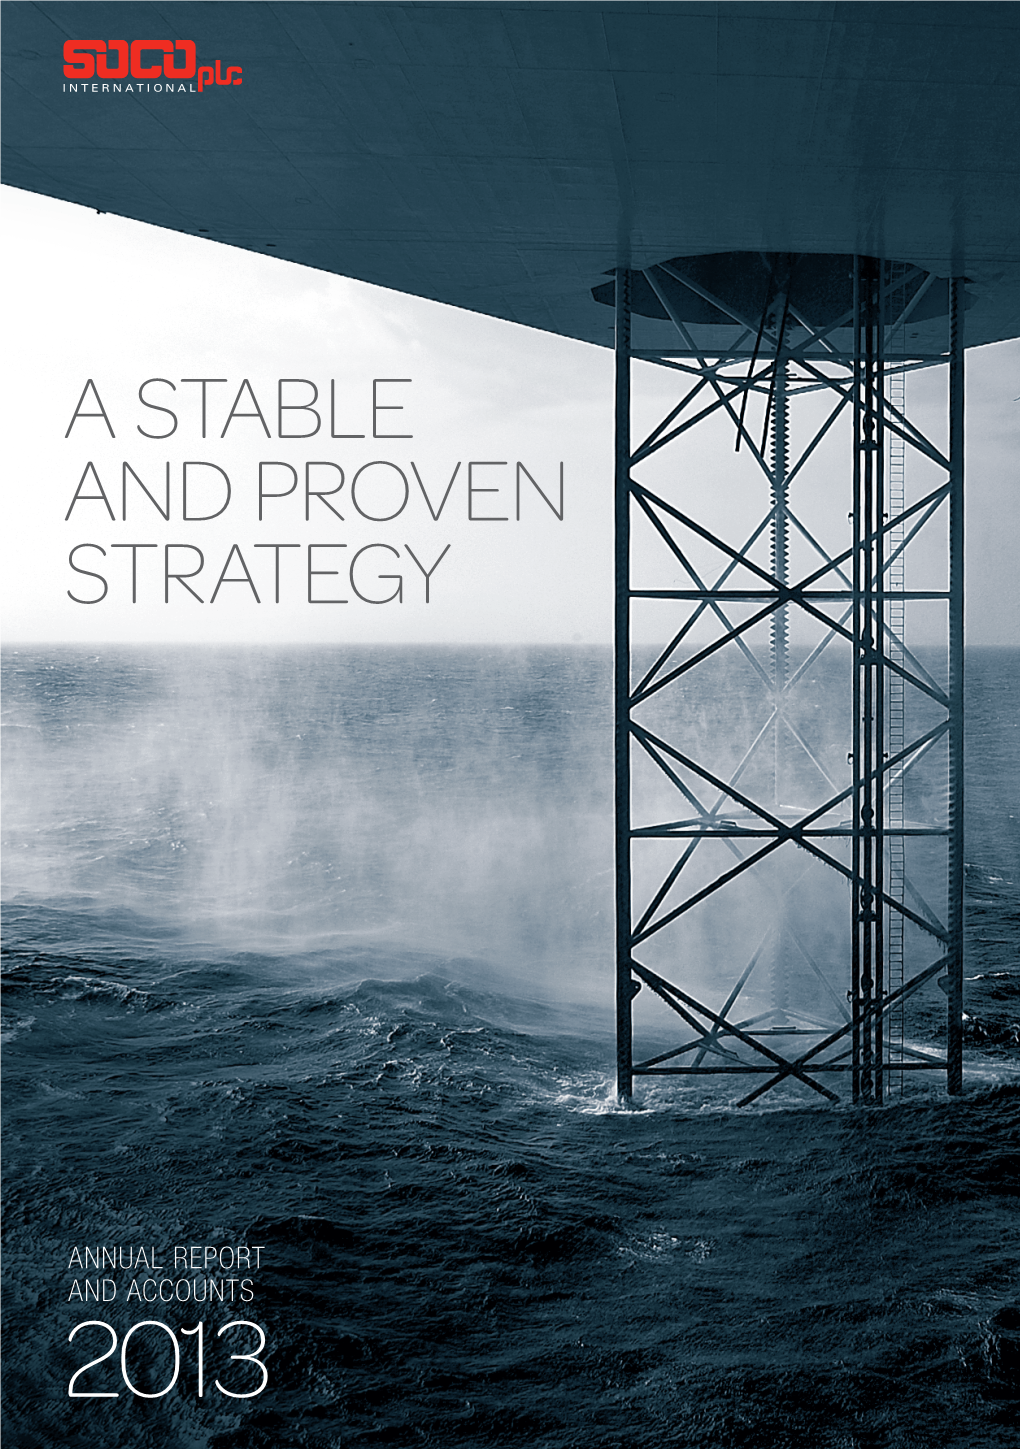 A Stable and Proven Strategy